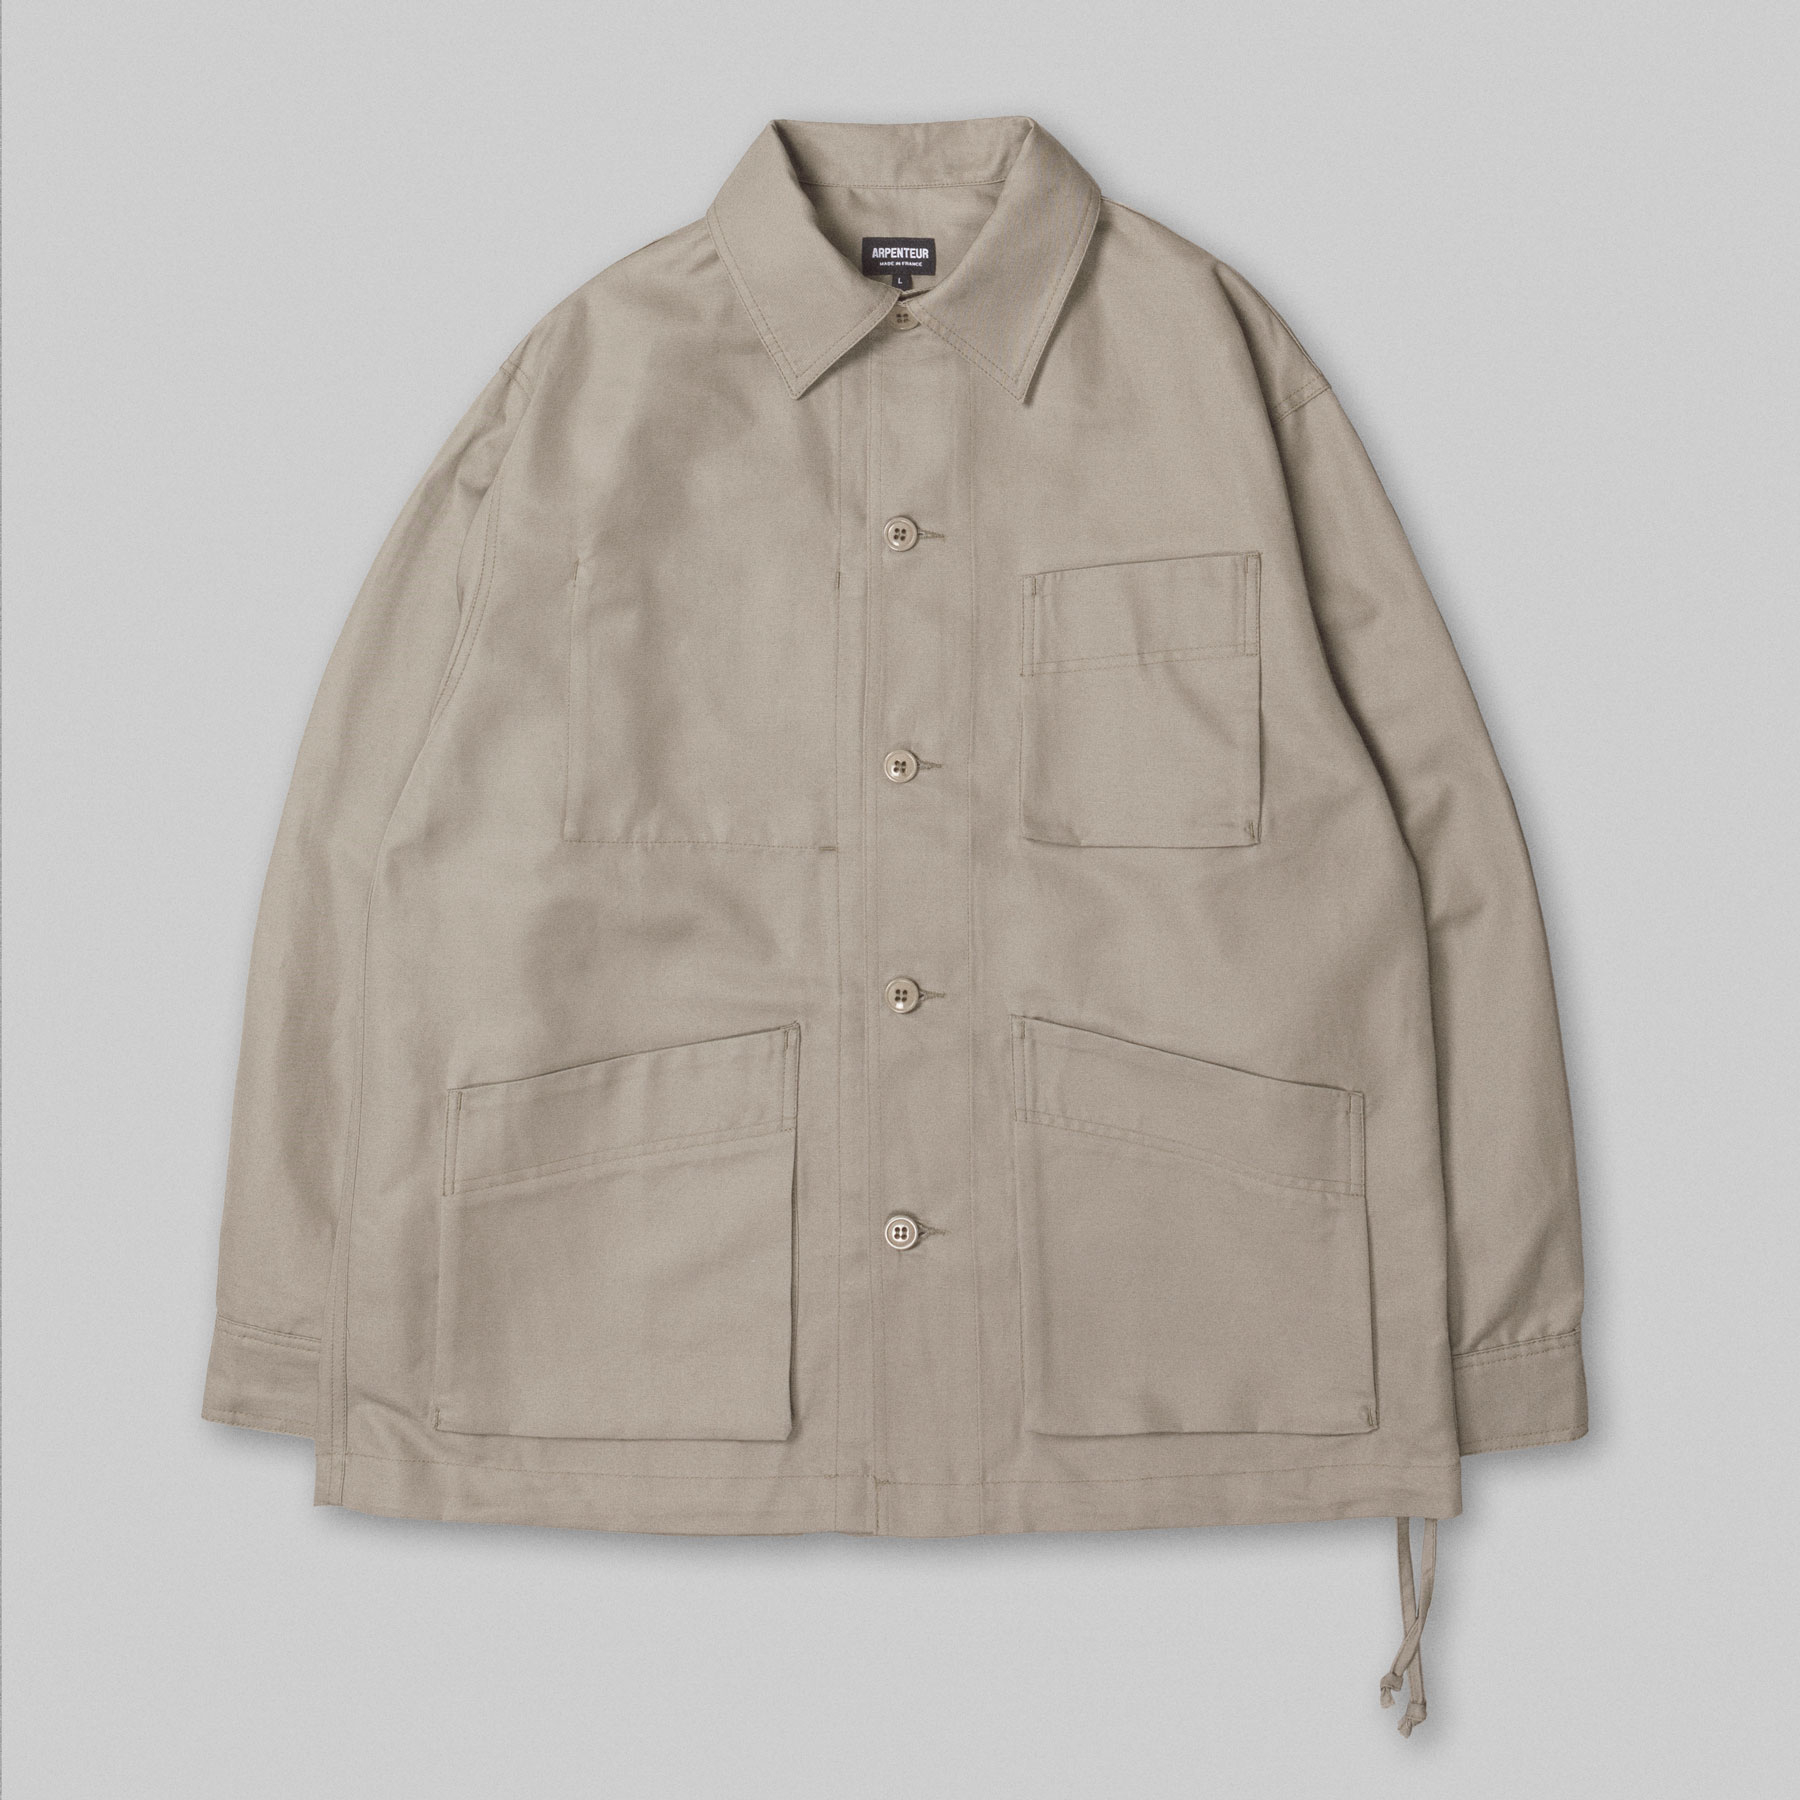 ADN jacket by ARPENTEUR in Stone color